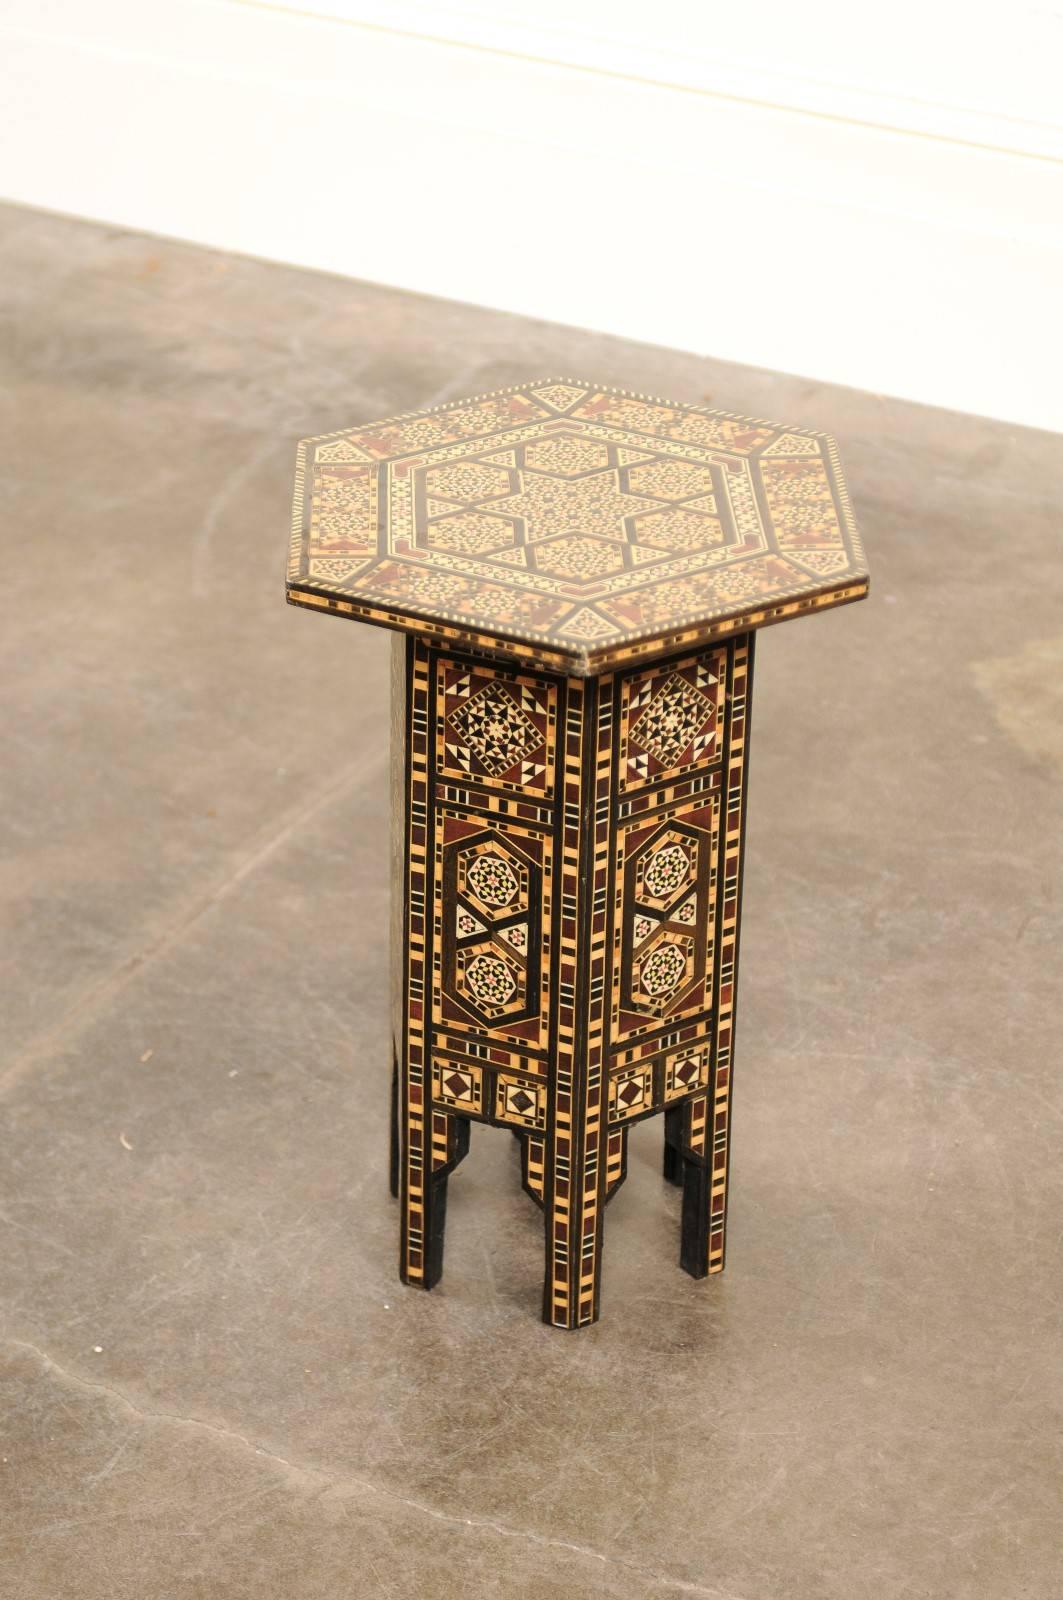 Moorish Inlaid Moroccan Petite Size Drinks Table with Wood and Bone Inlay, Mid-Century